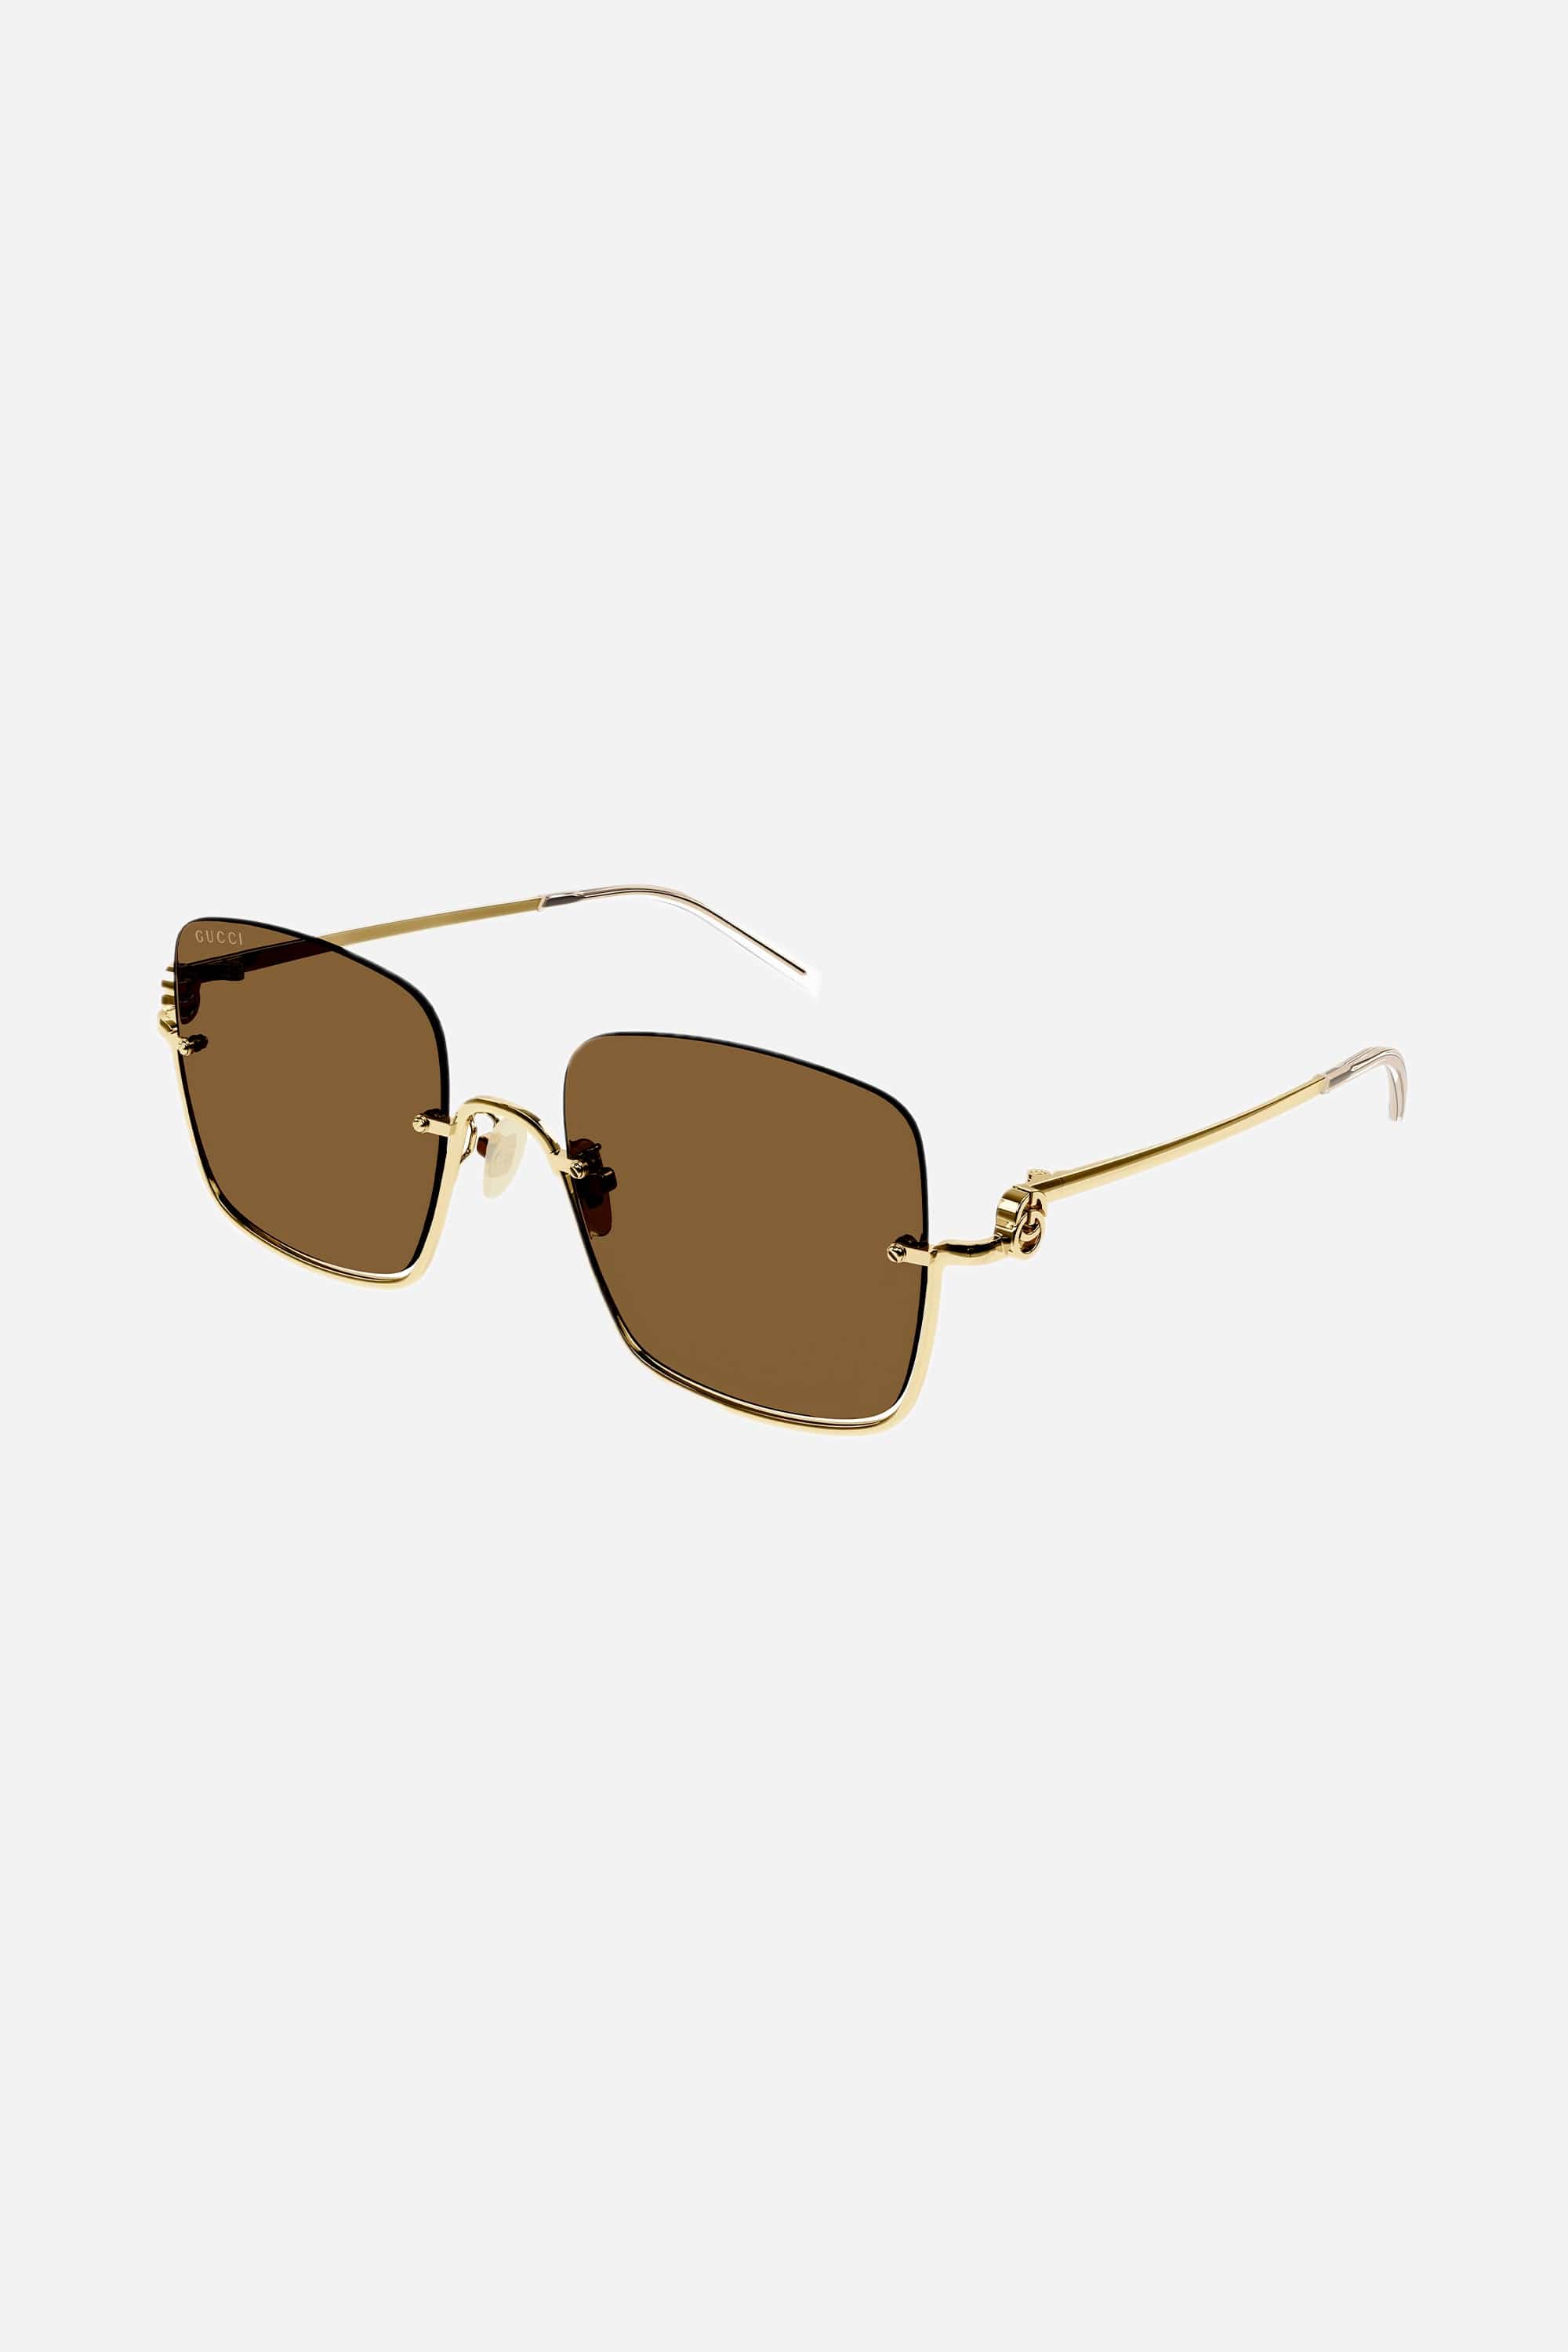 Gucci metal squared sunglasses with brown lenses - Eyewear Club